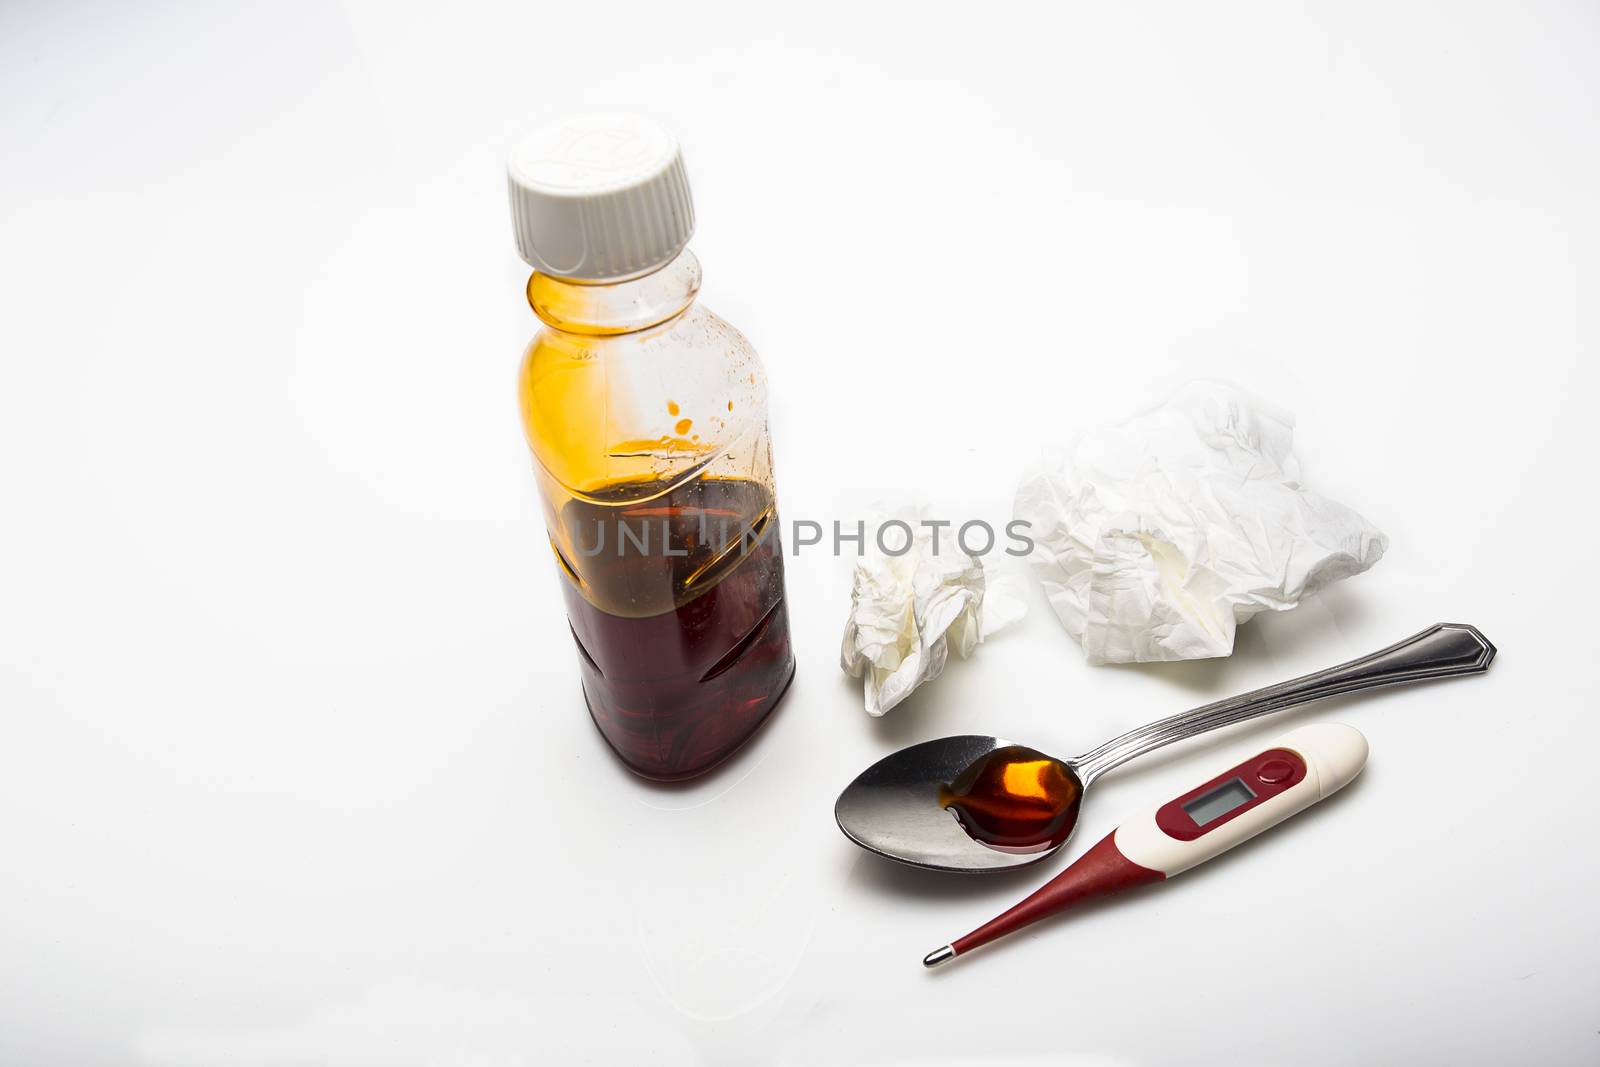 Cough sirop in a spoon and old tissue on a white background